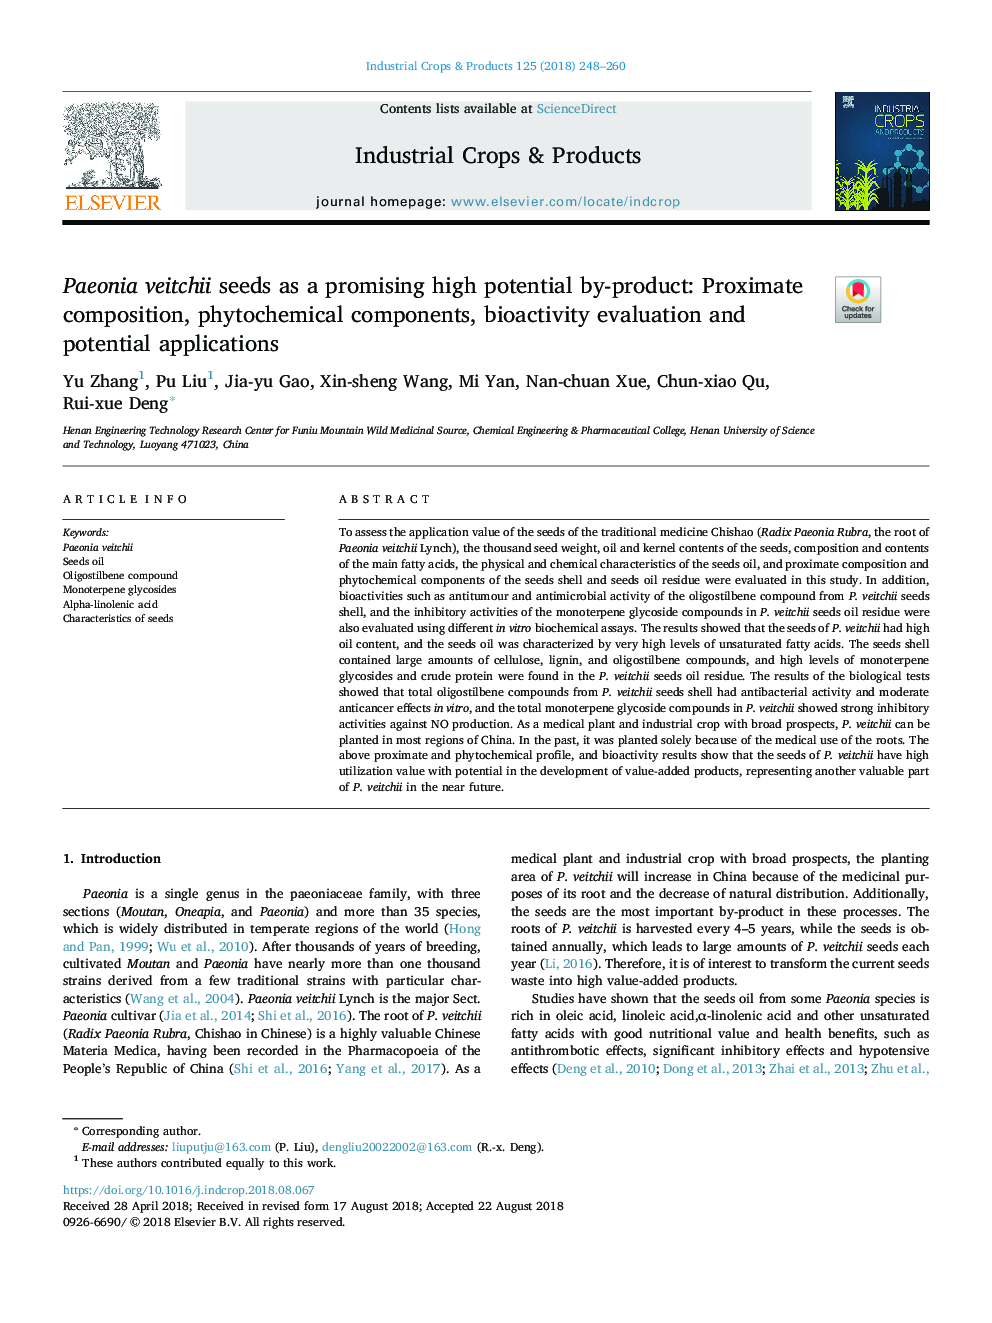 Paeonia veitchii seeds as a promising high potential by-product: Proximate composition, phytochemical components, bioactivity evaluation and potential applications